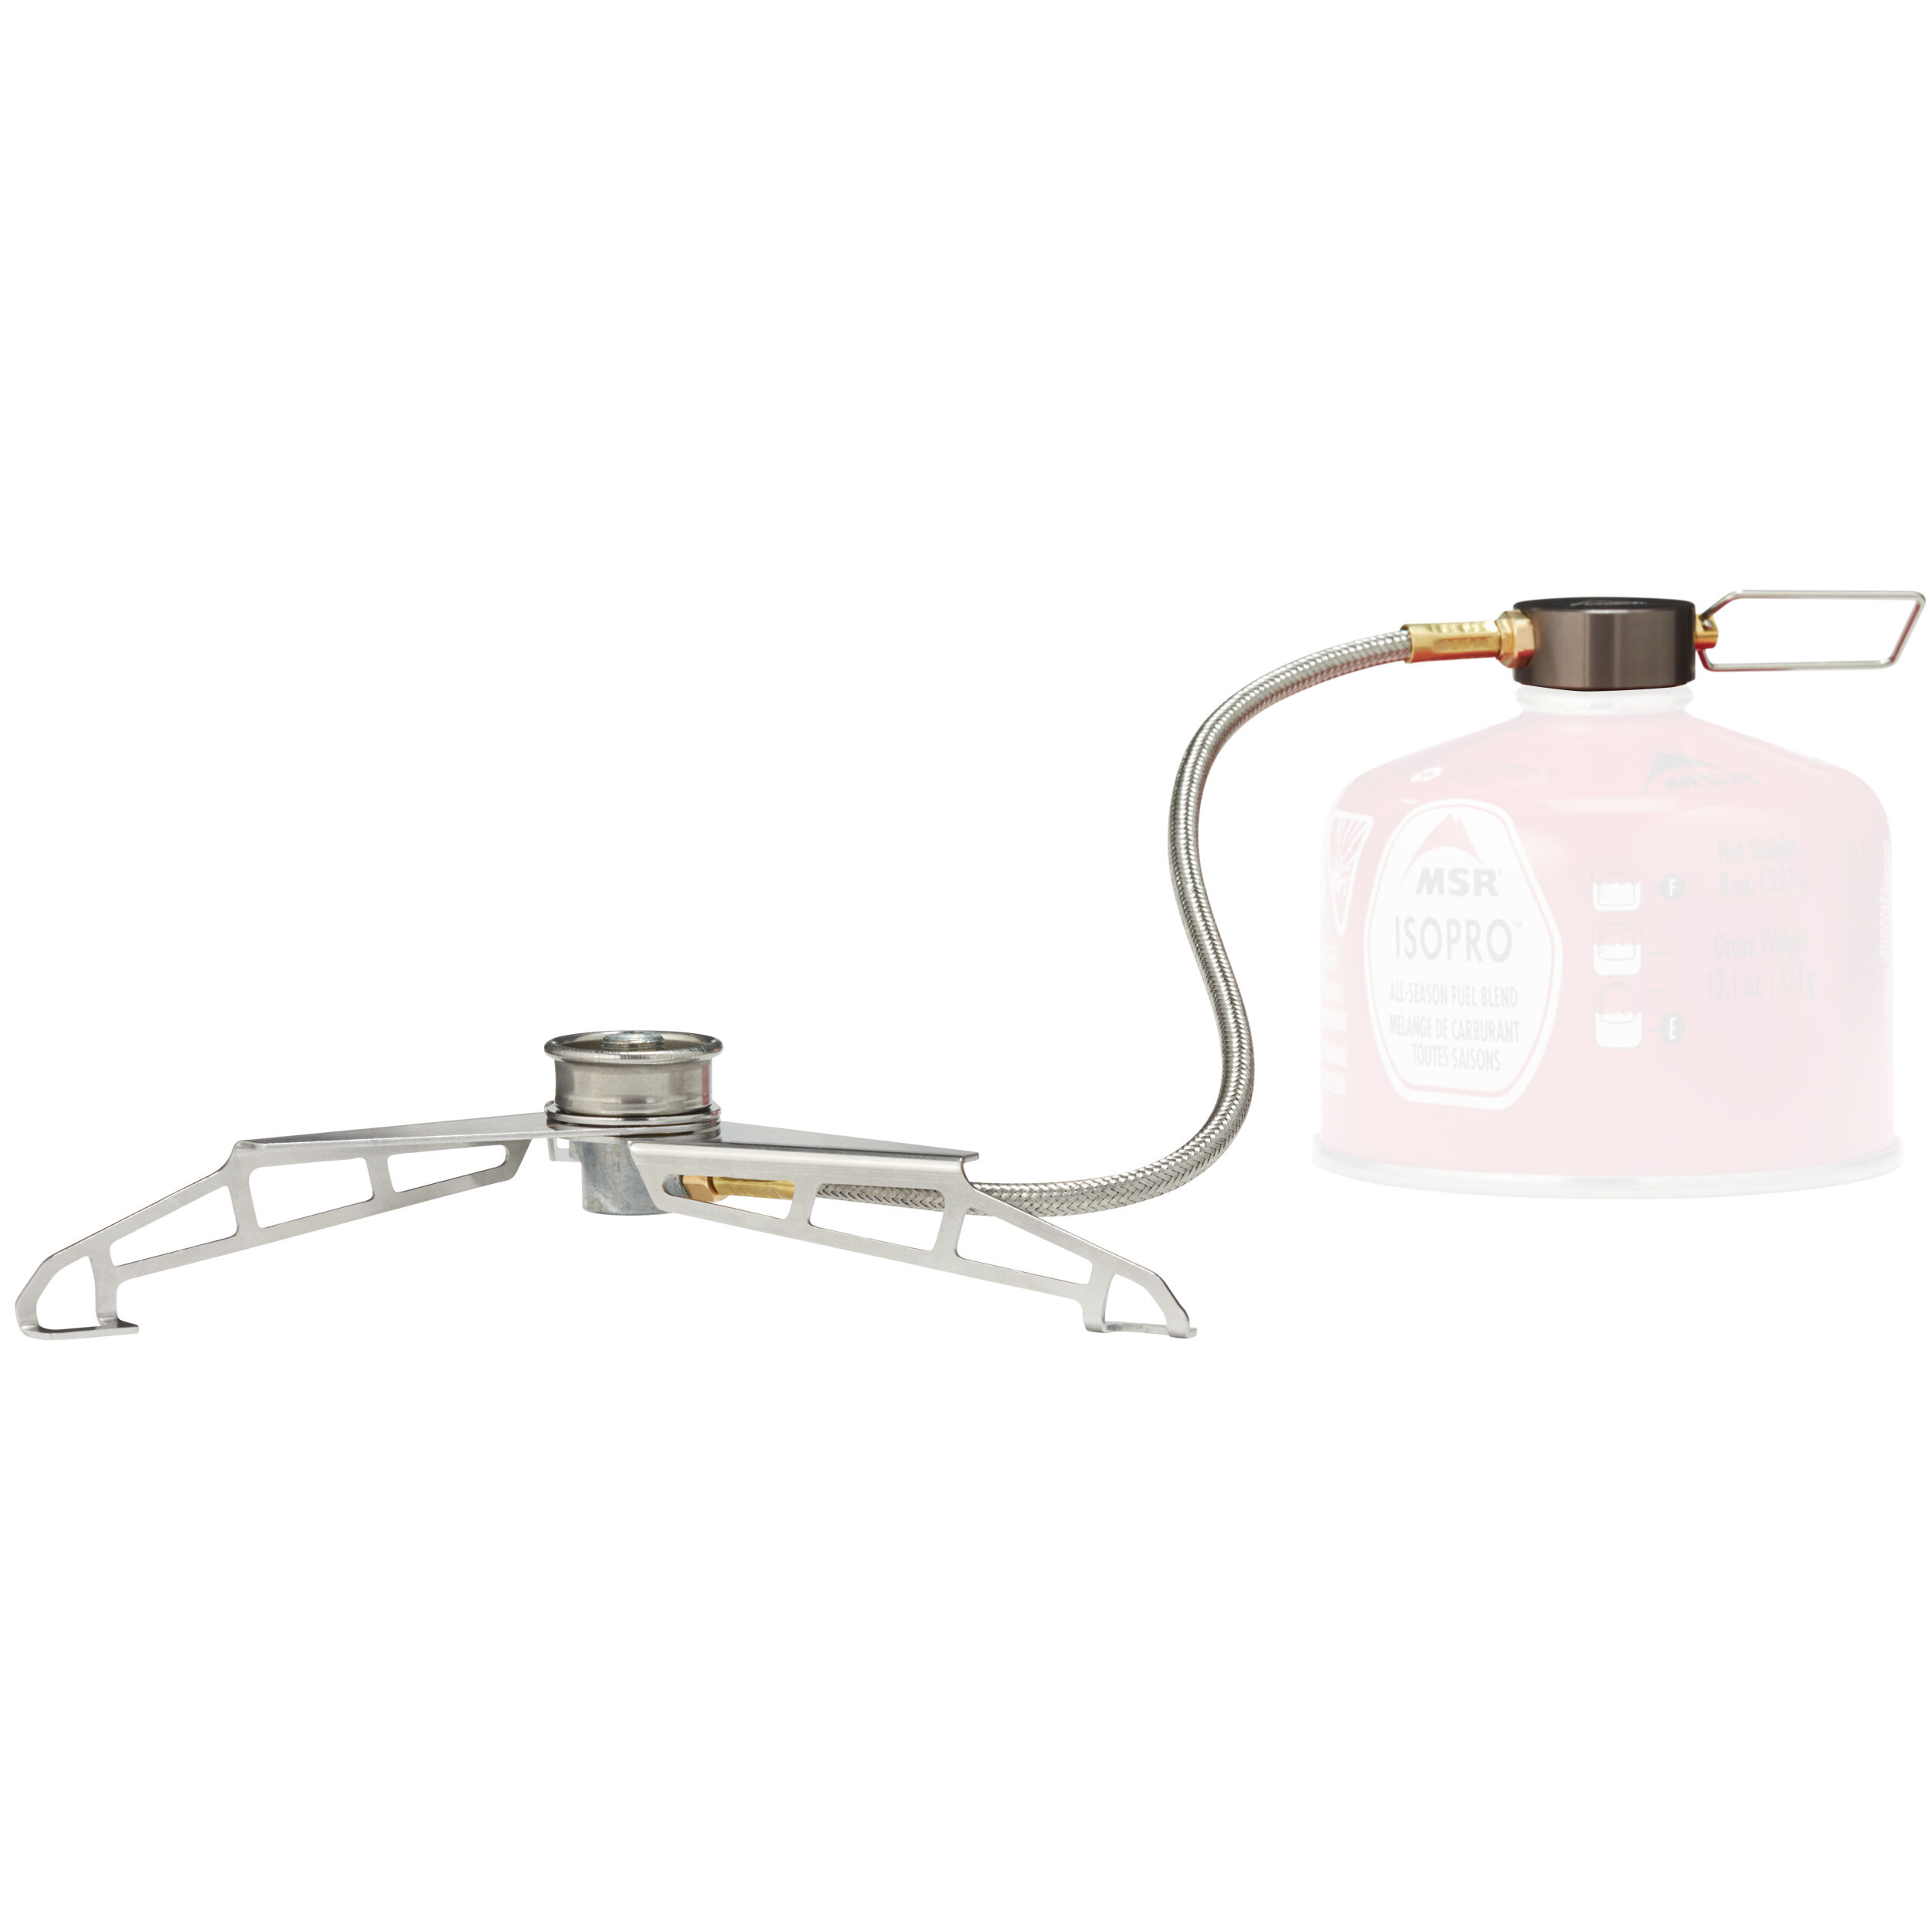 MSR® Backpacking and Camping Cook Stove Accessories | MSR®